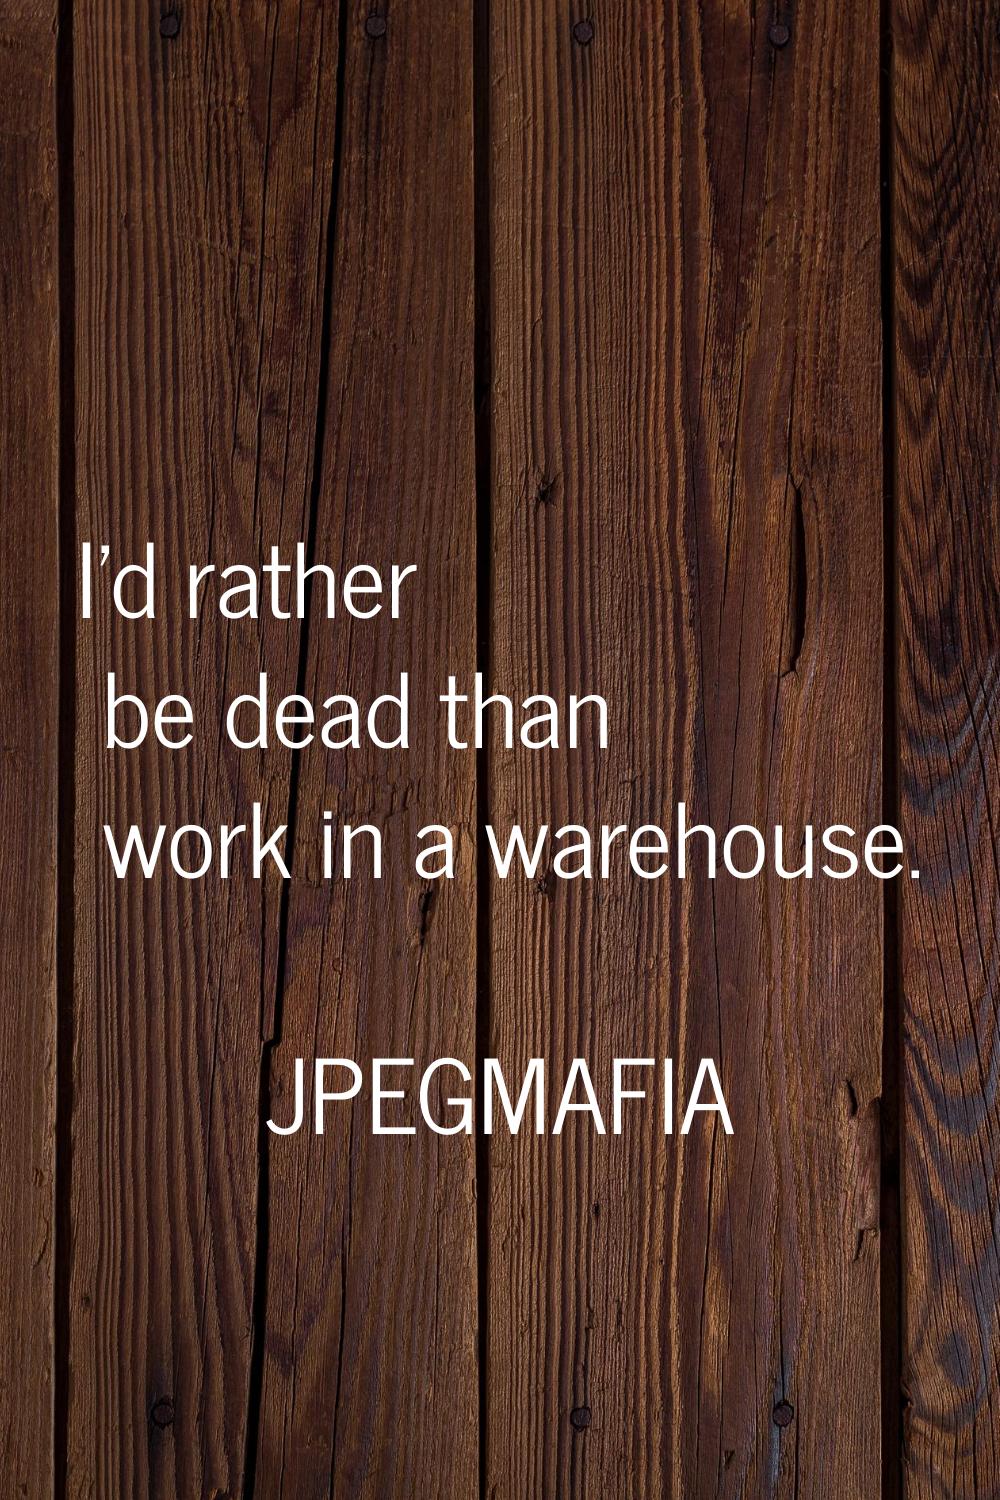 I'd rather be dead than work in a warehouse.